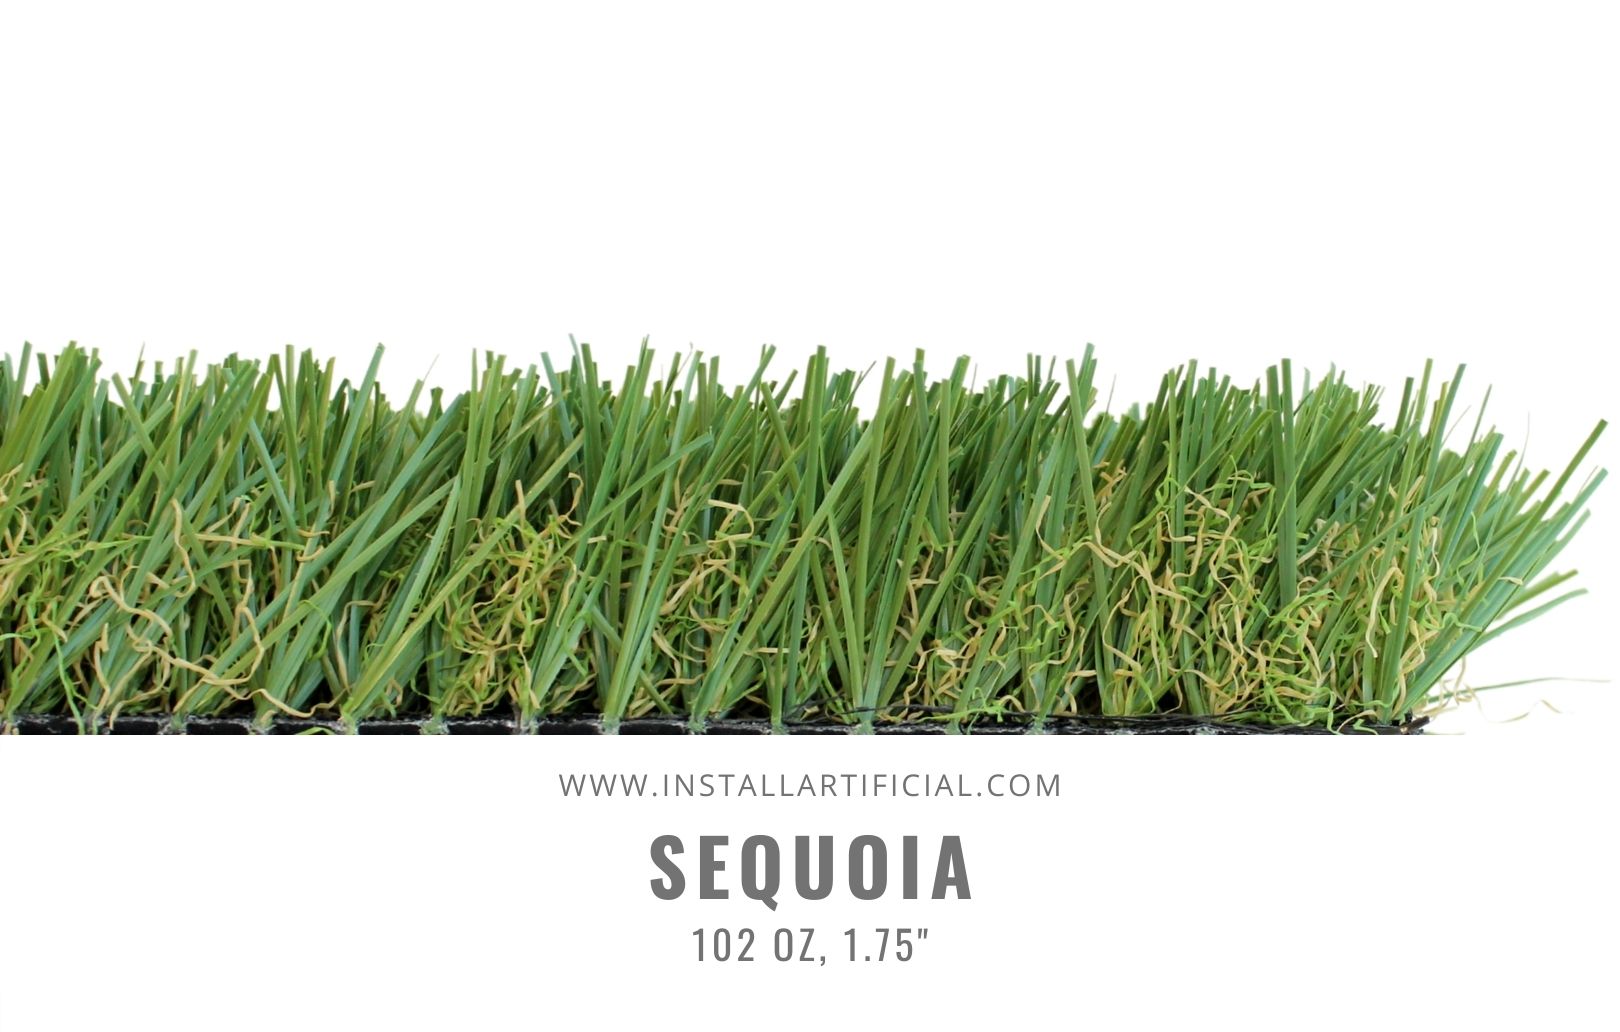 Sequoia,Everlast, Synthetic Grass Warehouse, Side view